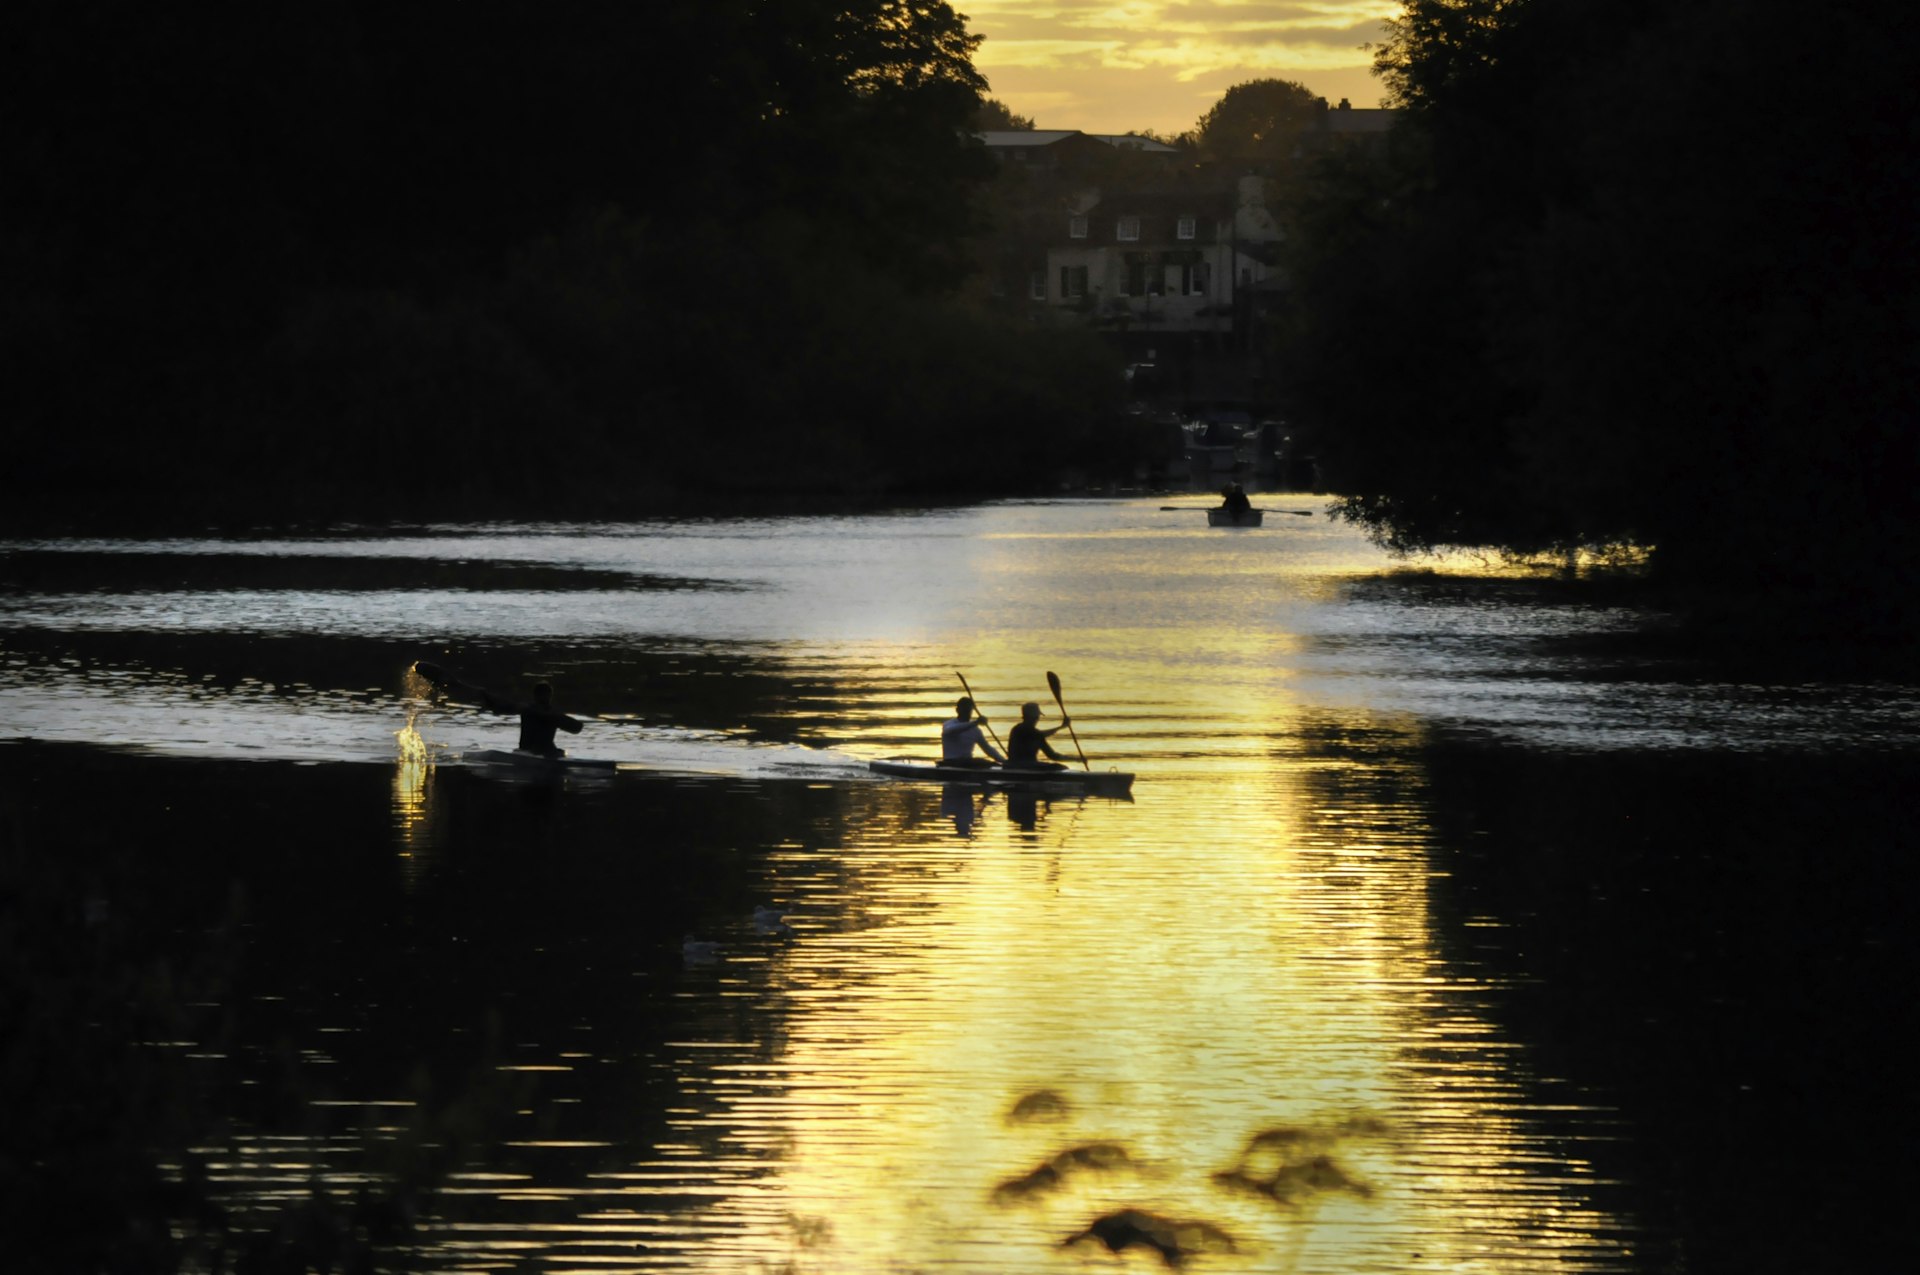 The silhouettes of rowers and the golden glow on still waters of the River Thames in the Autumn light at sunset.